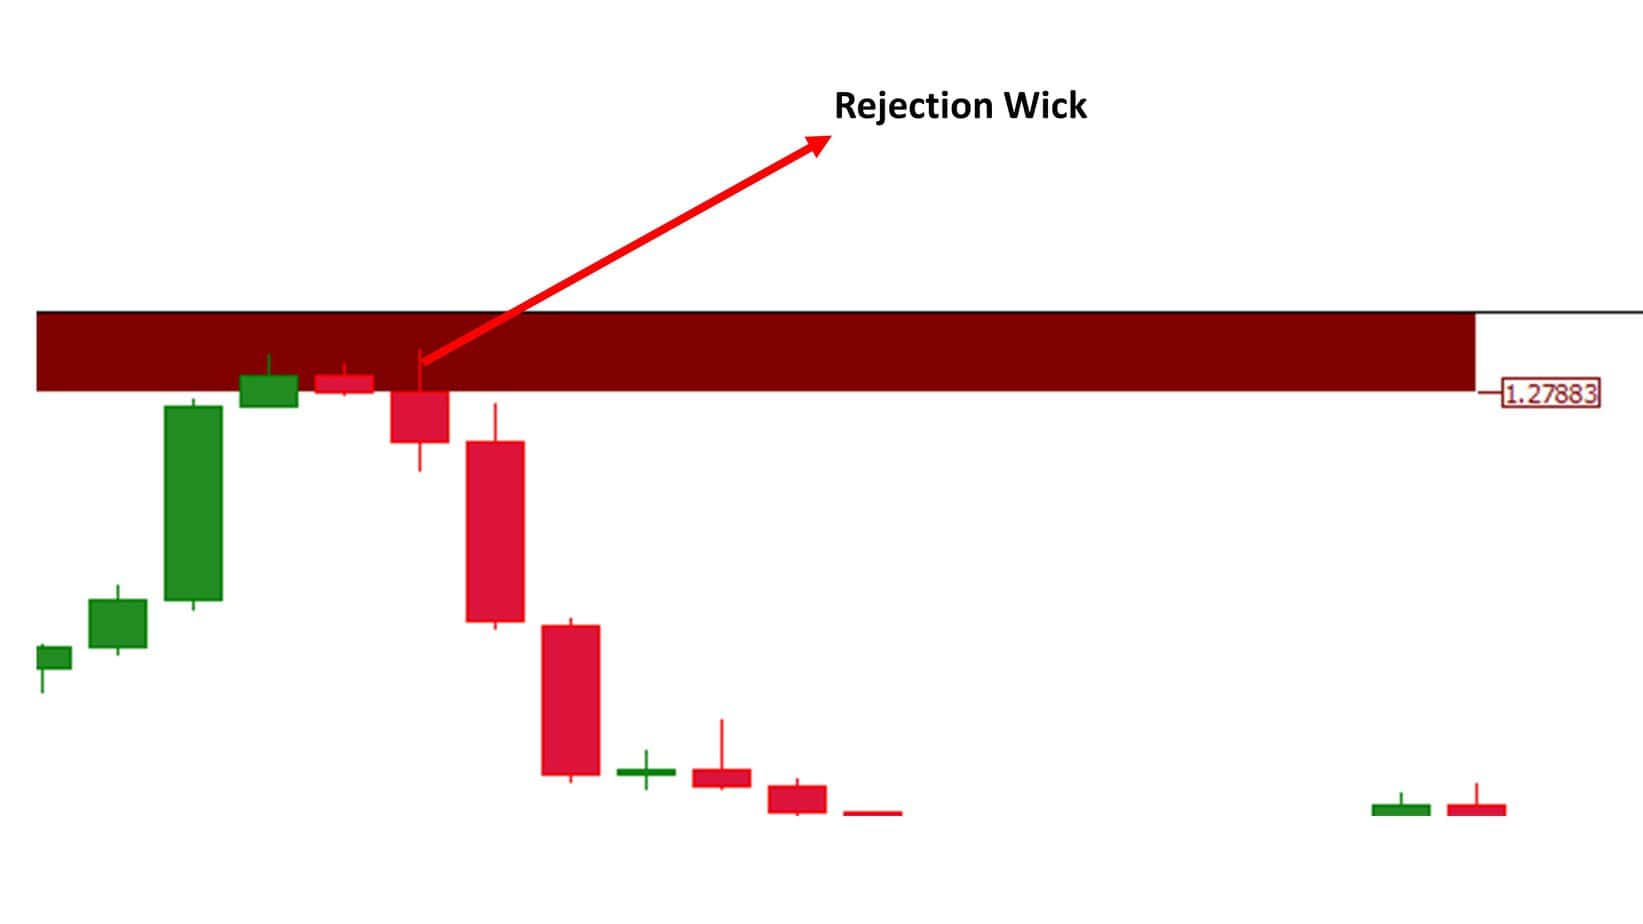 wick price rejection